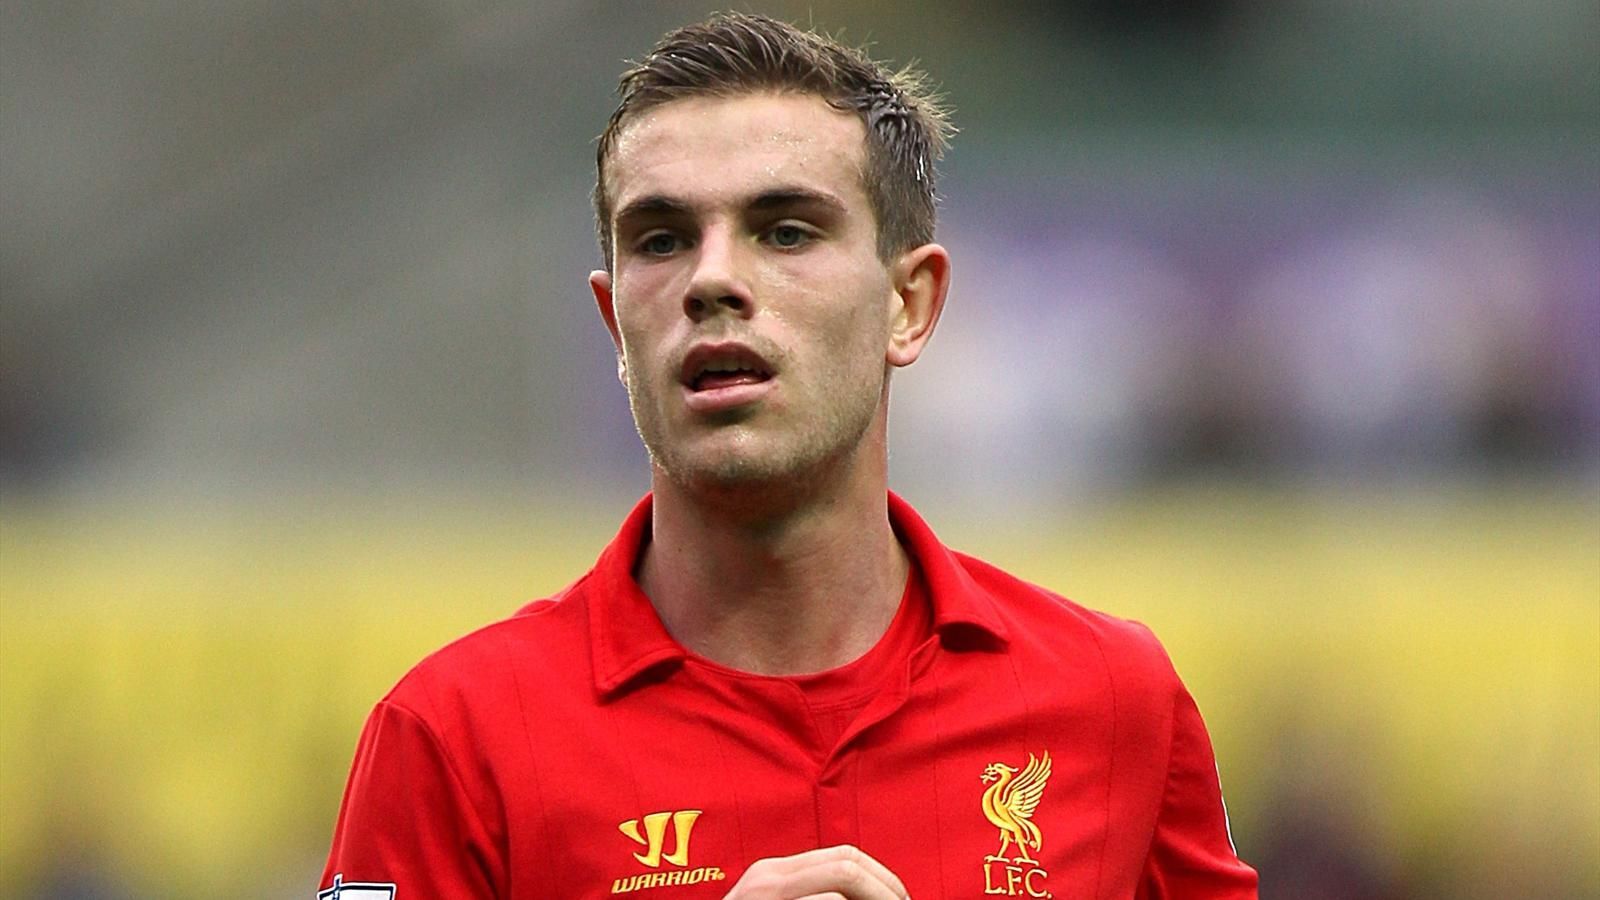 Jordan Henderson spoke about his memories from a year ago  